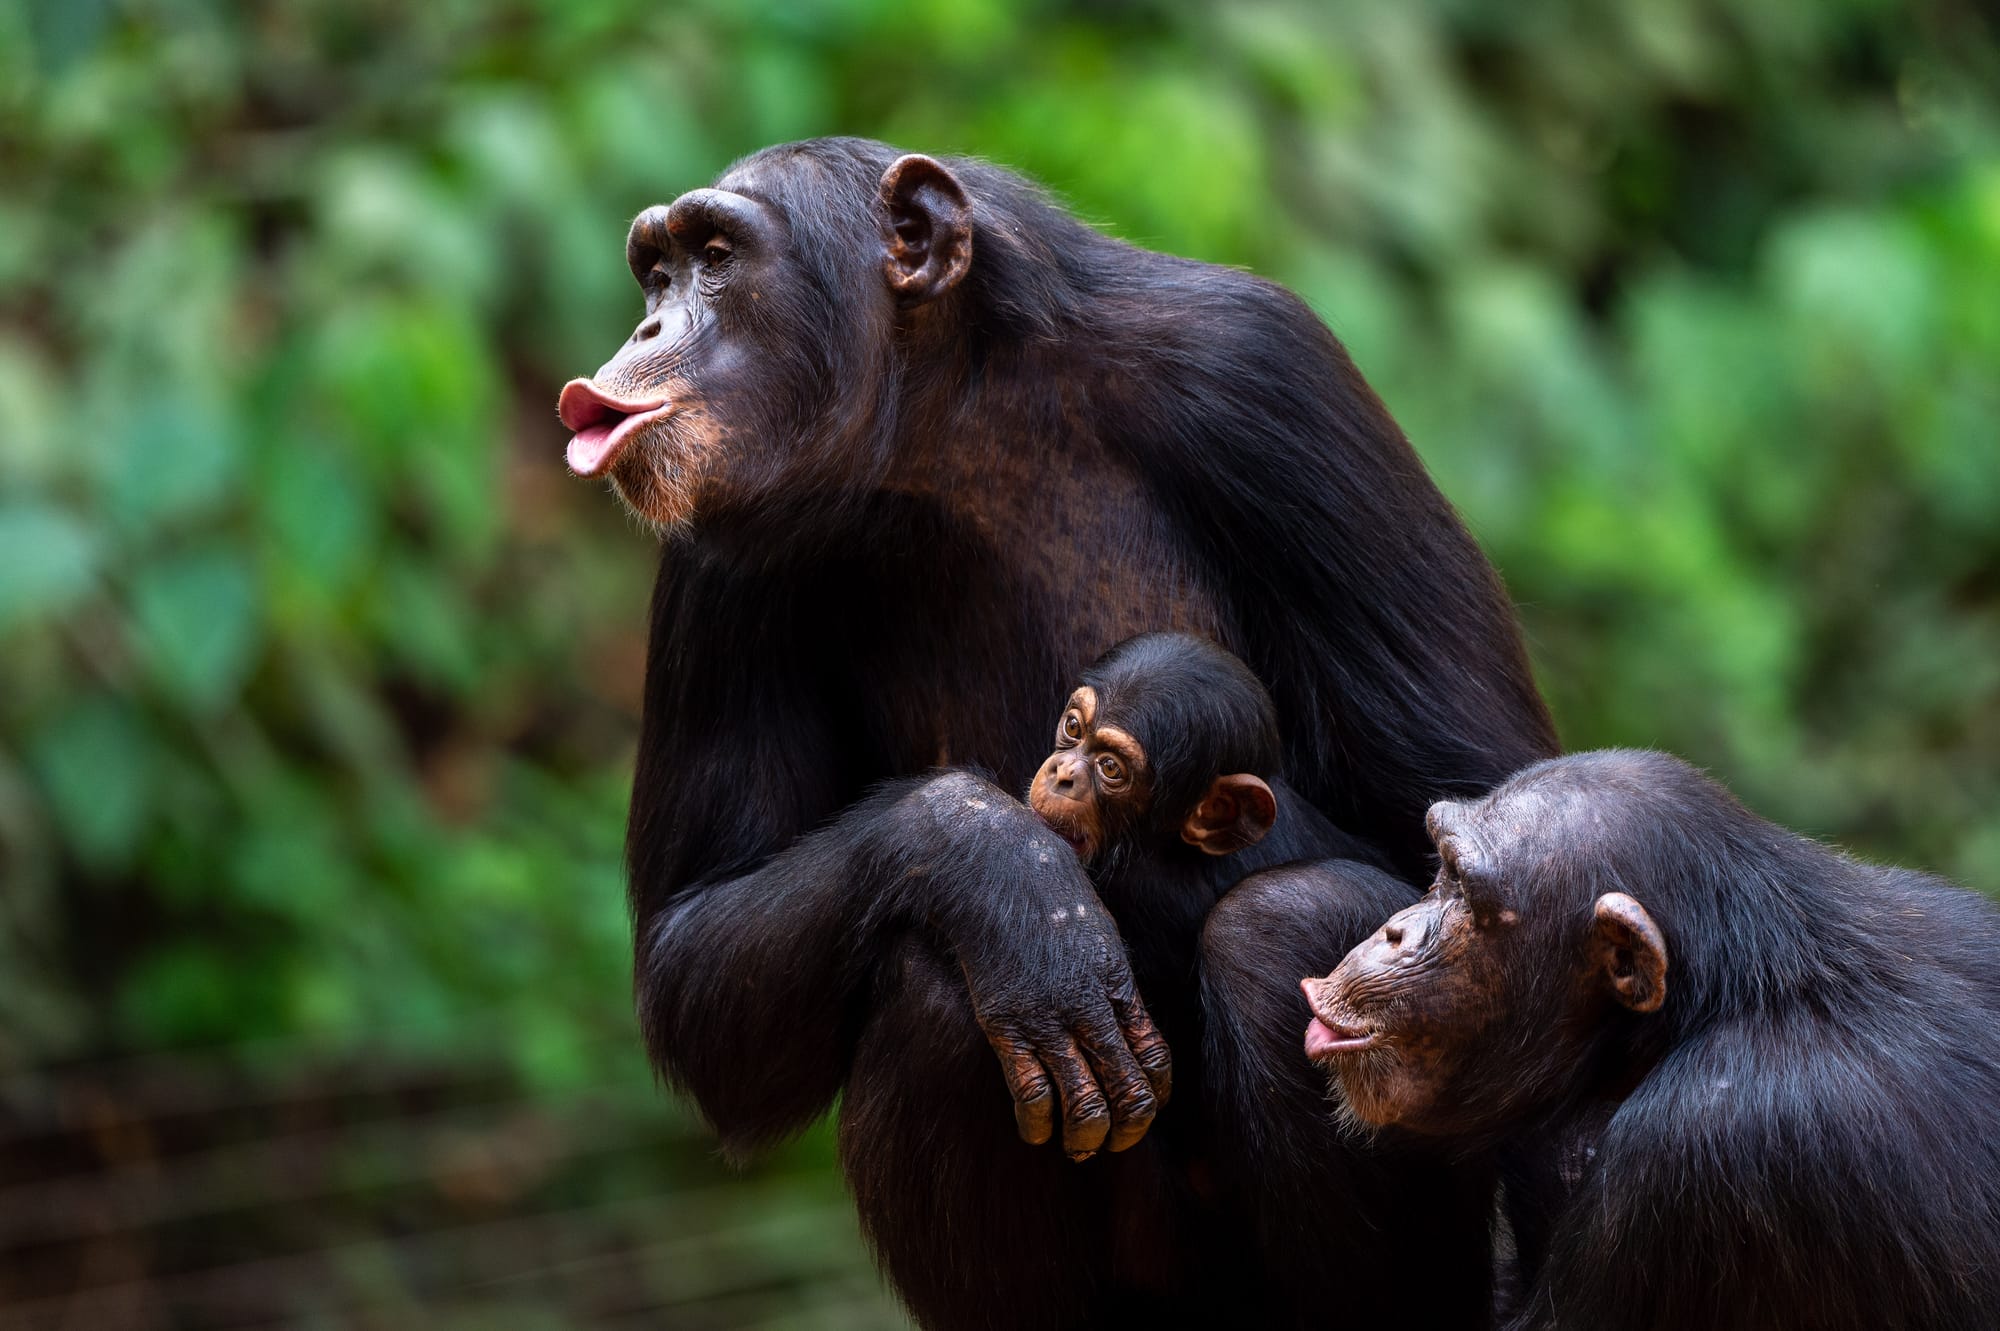 three chimpanzees, including one infant, together